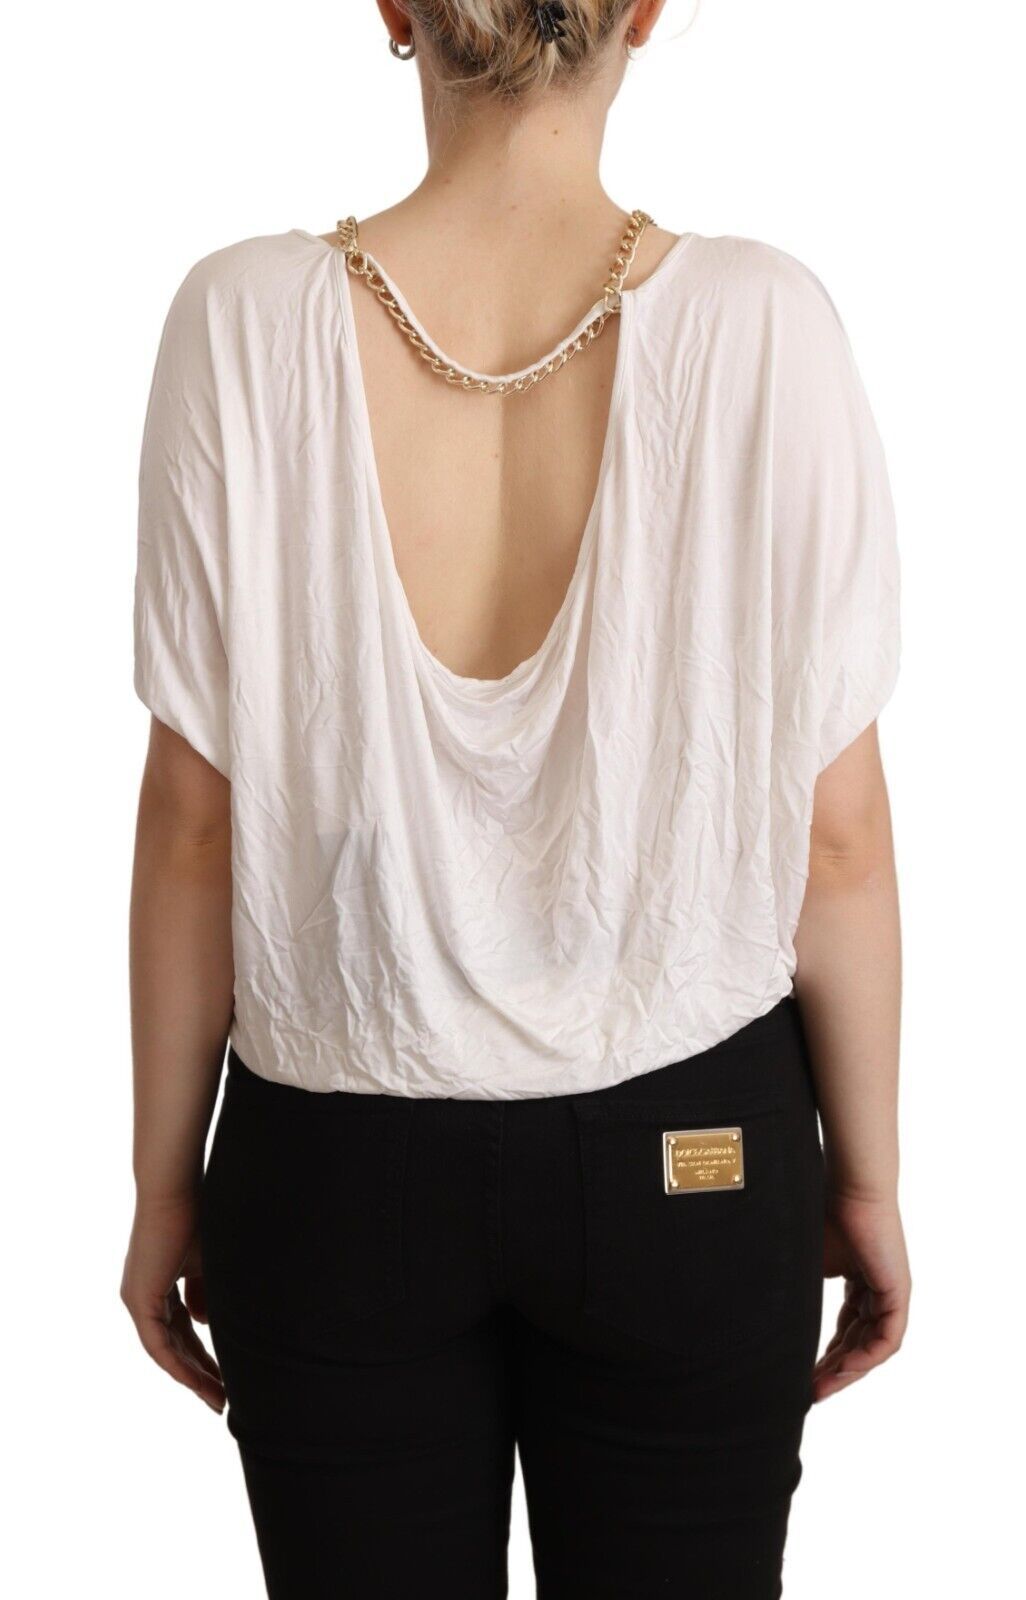 Guess By Marciano Elegant White Gold Chain T-Shirt Top